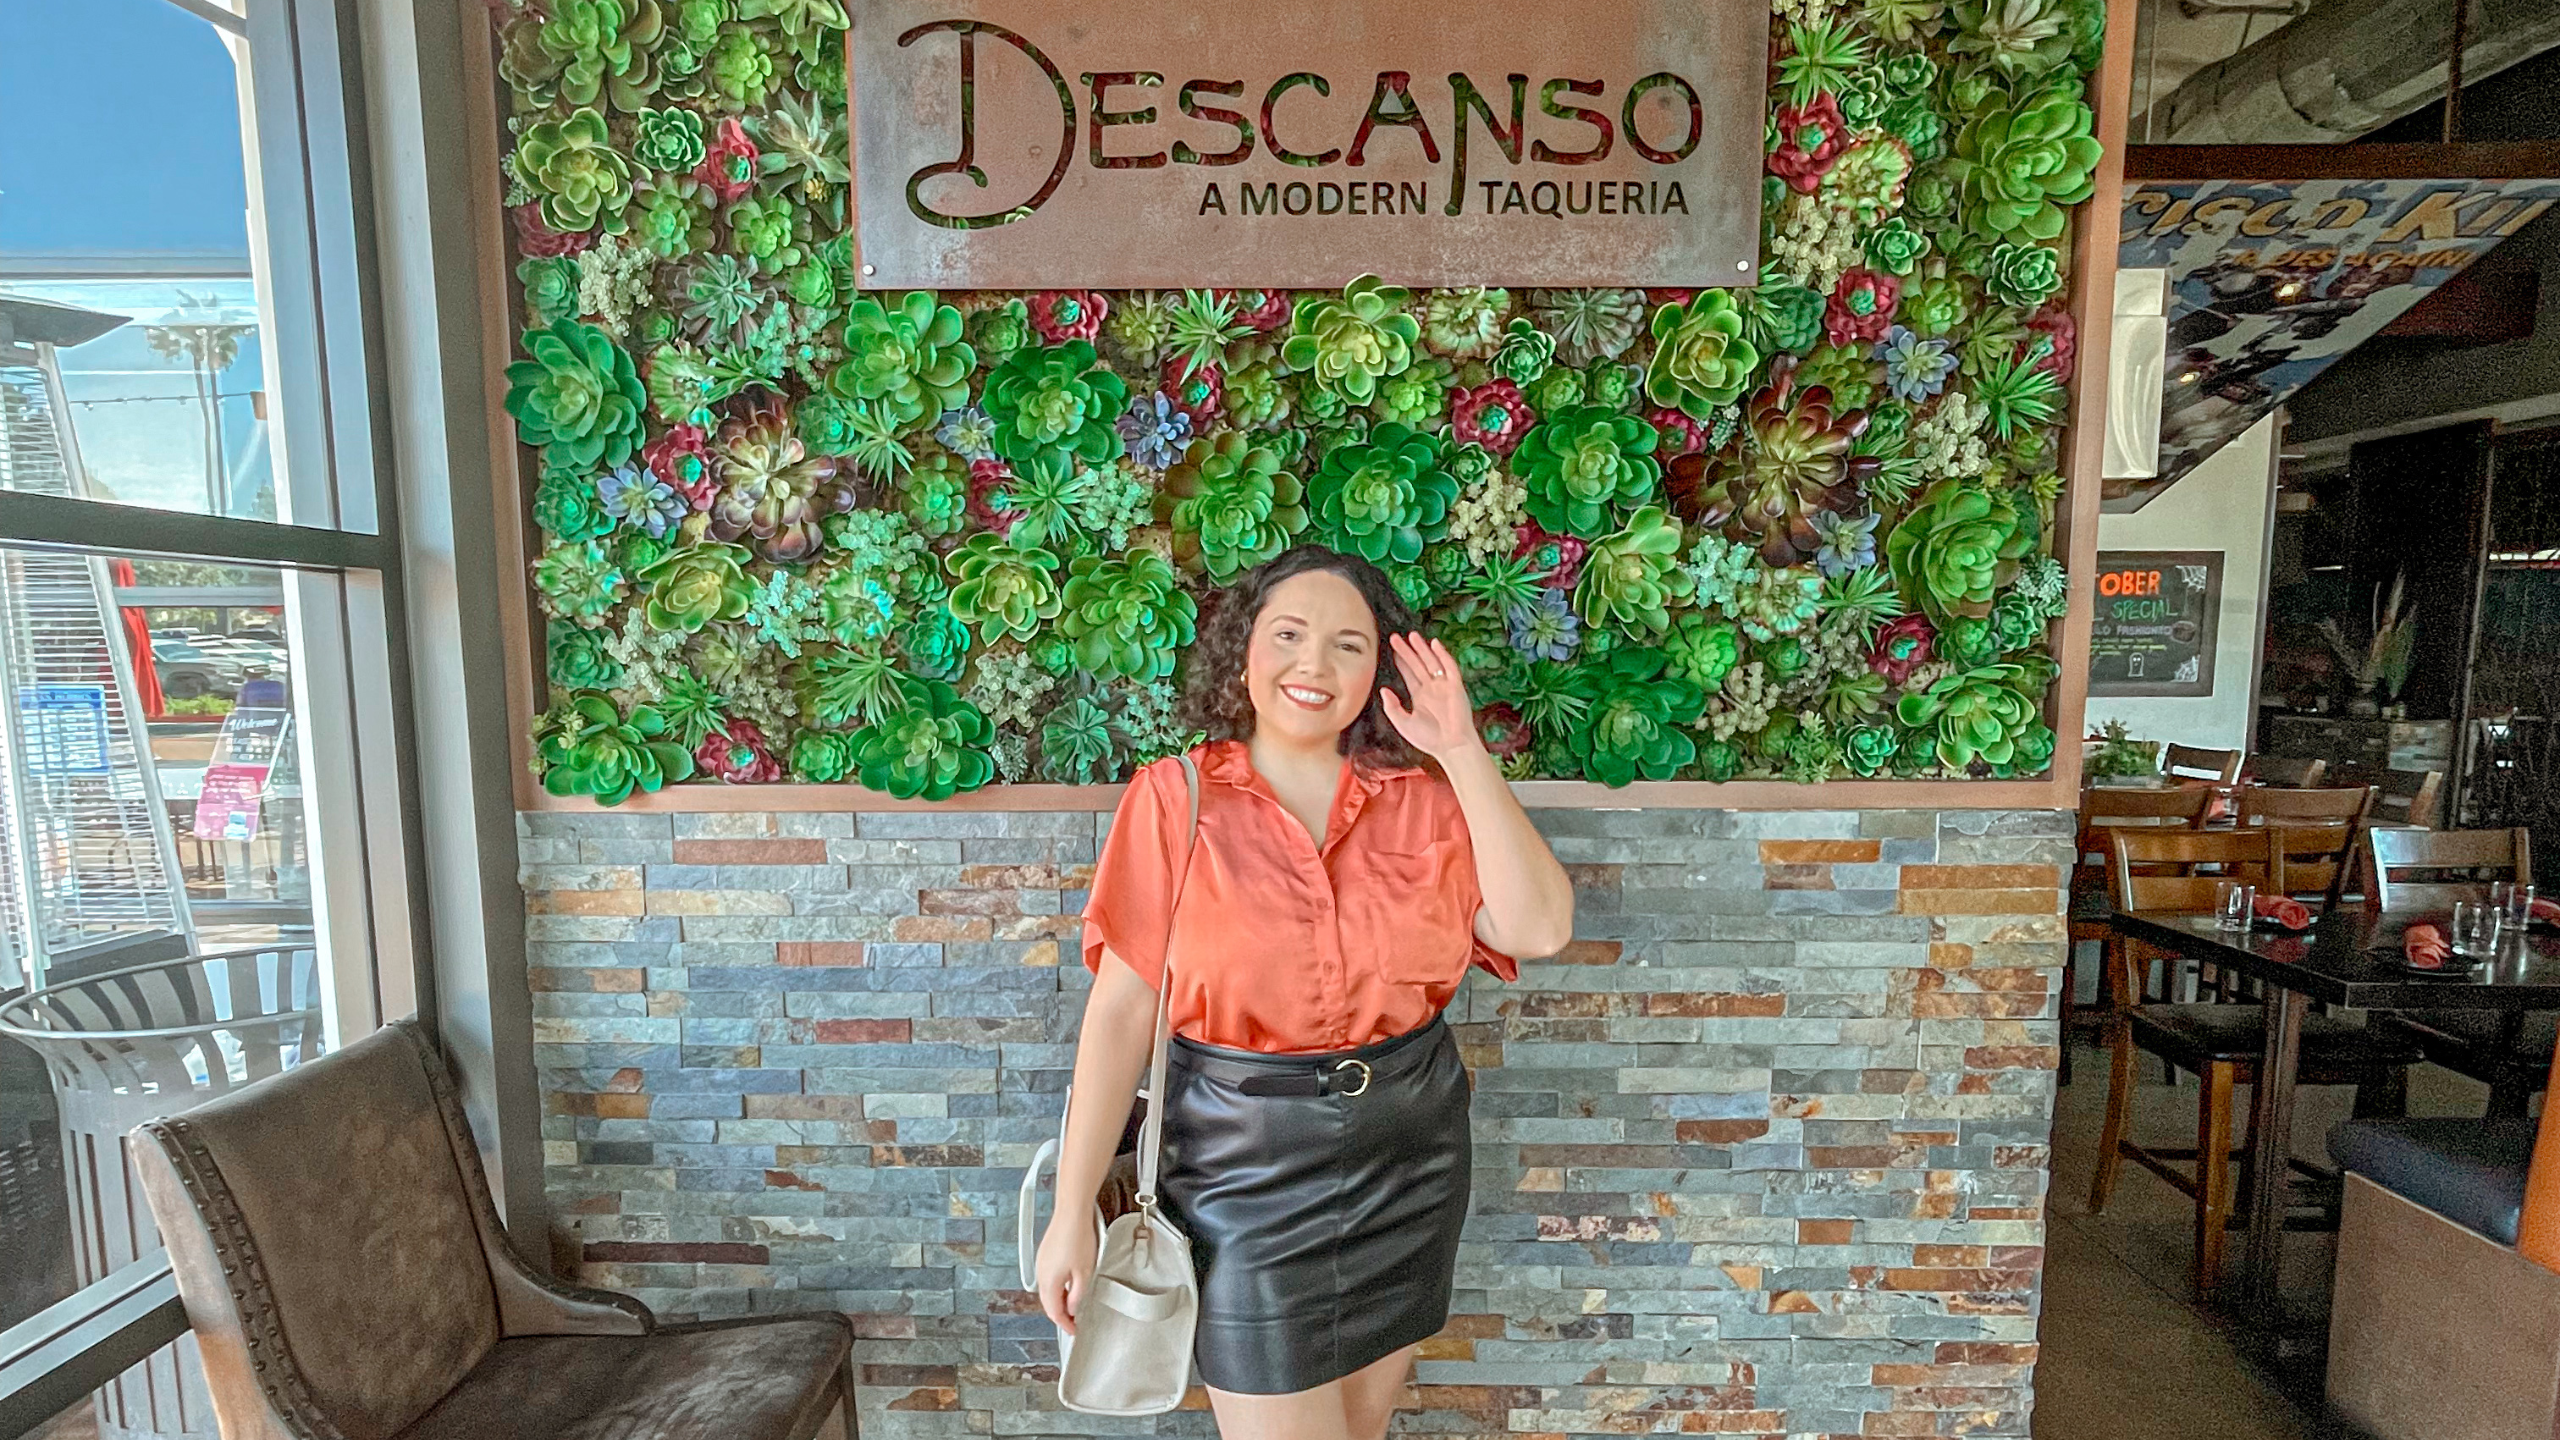 If you are looking to brunch at one of the best places to eat in Costa Mesa, check out Descanso Restaurant a Mexican Hibachi restaurant.